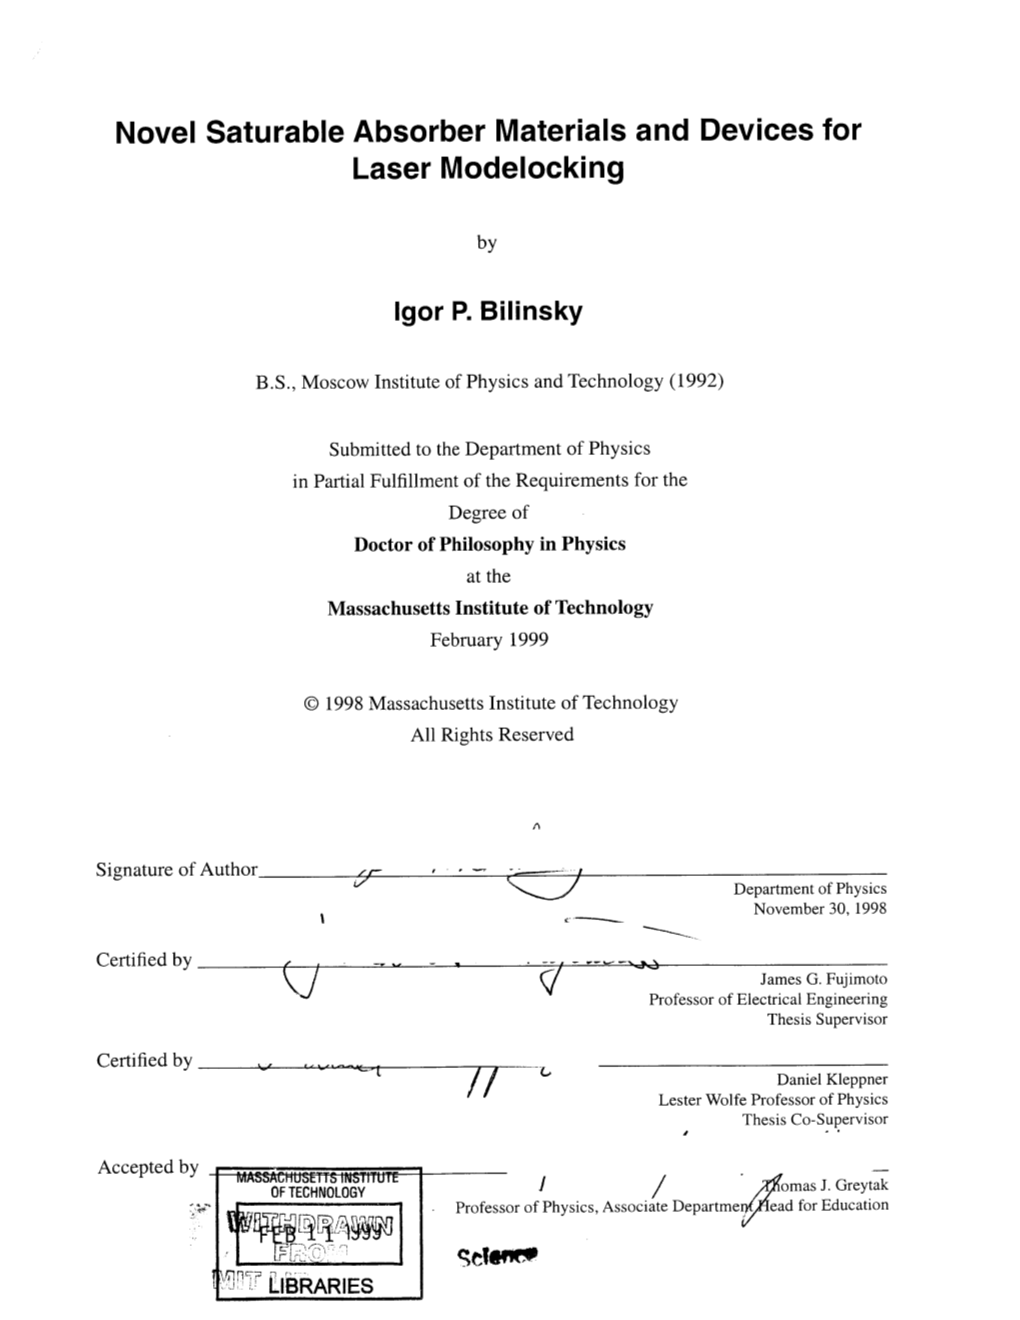 Novel Saturable Absorber Materials and Devices for Laser Modelocking